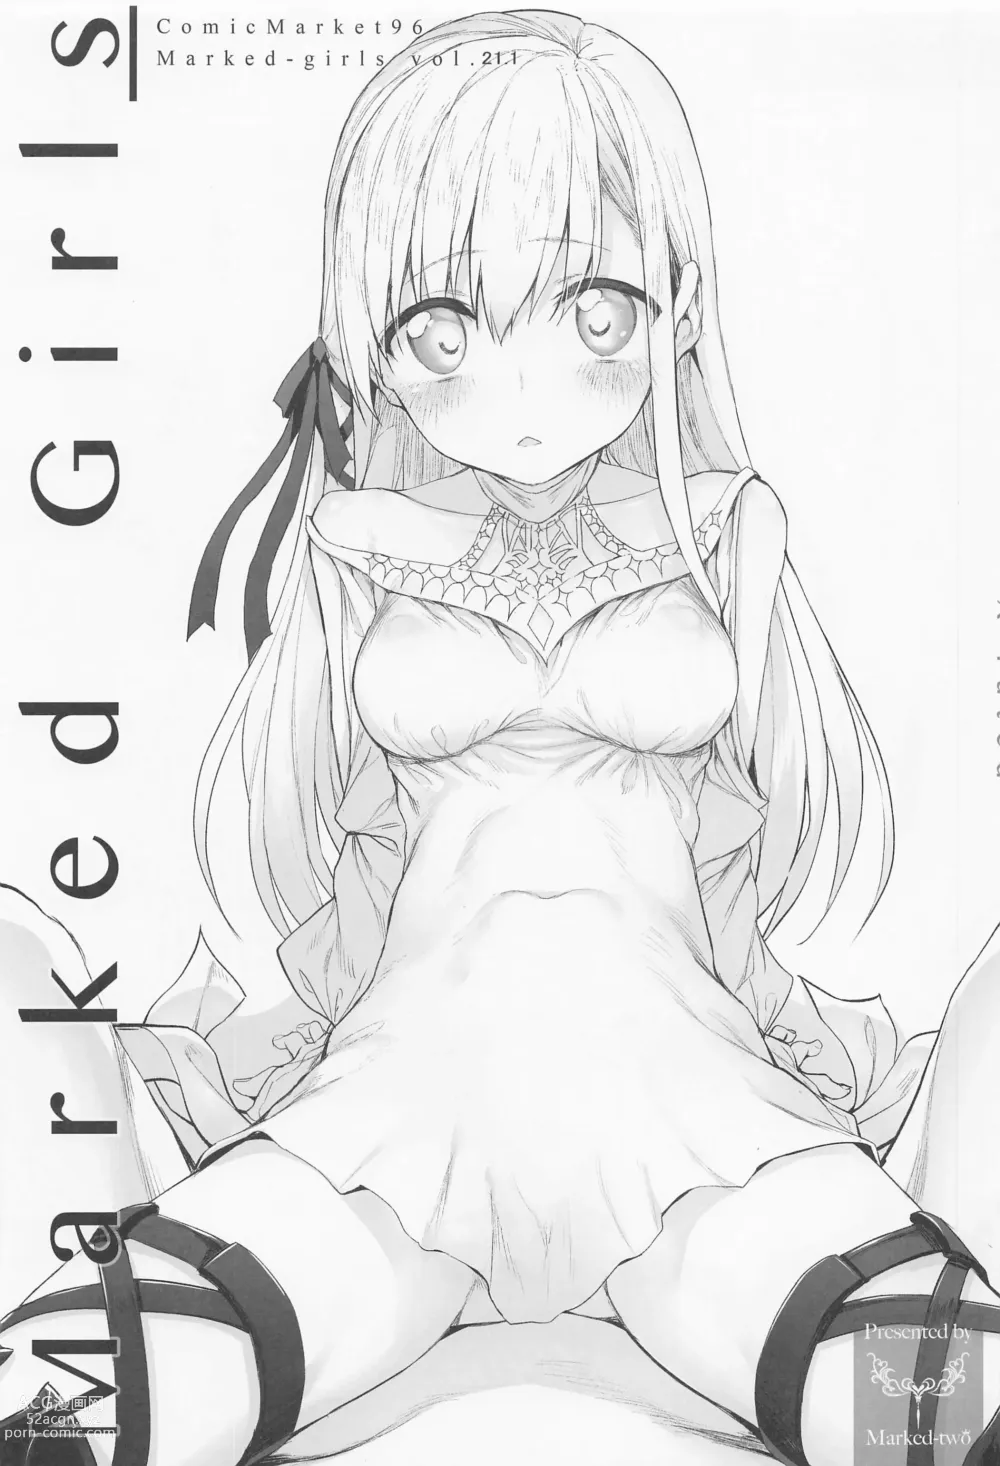 Page 26 of doujinshi Marked-girls Collection Vol. 6